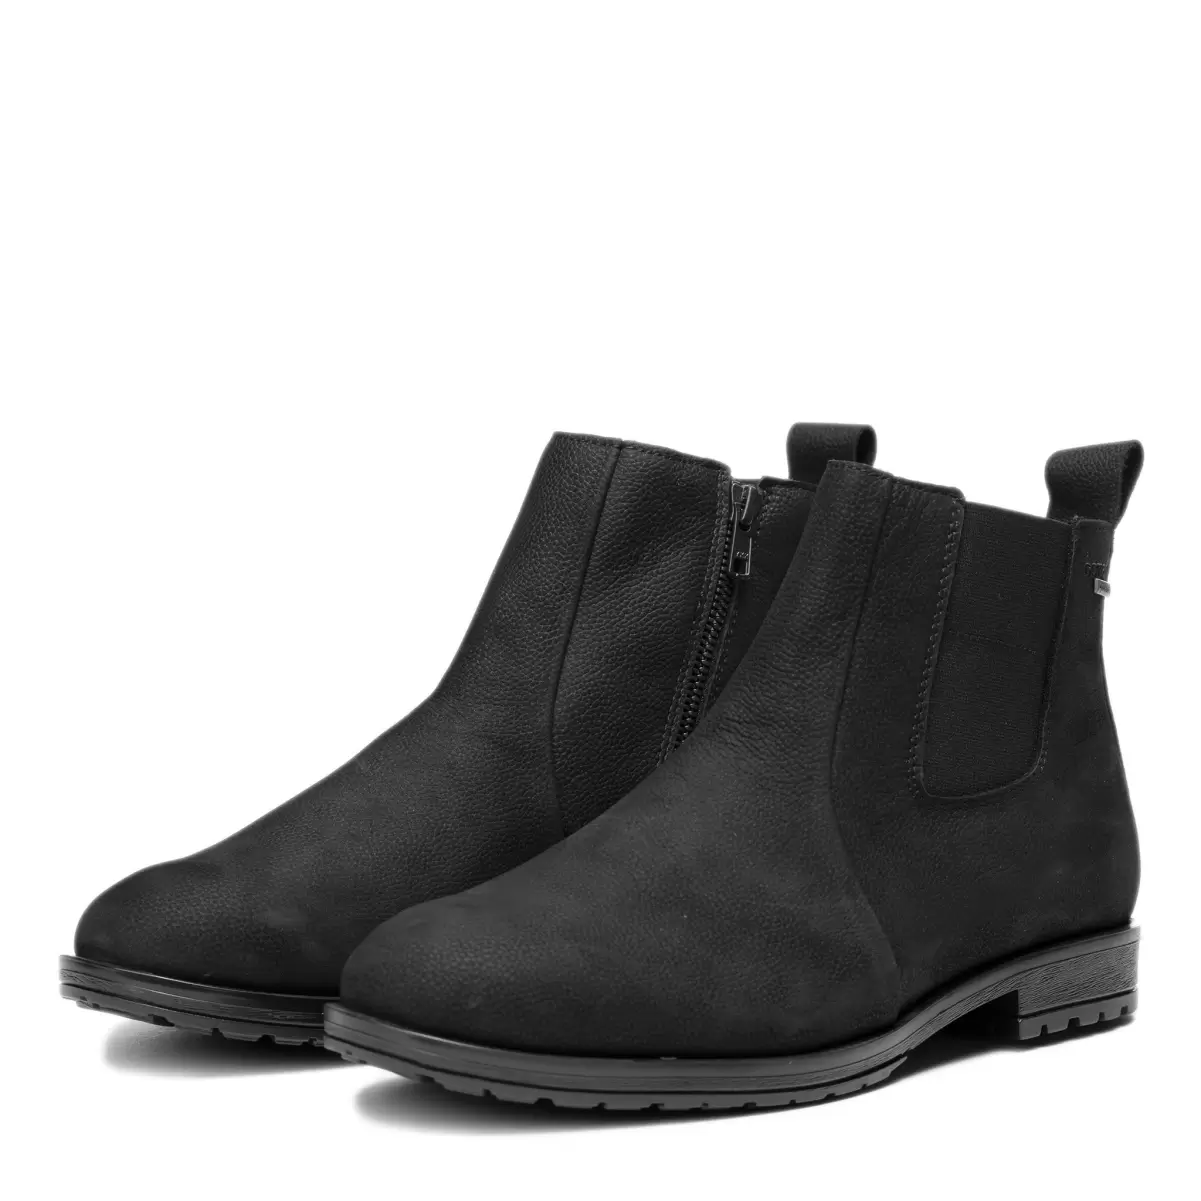 Men Pomarfin Oy Kaarre Men’s Gore-Tex® Chelsea Boots Ankle Boots Black Rugged Nubuck/5599 - 1